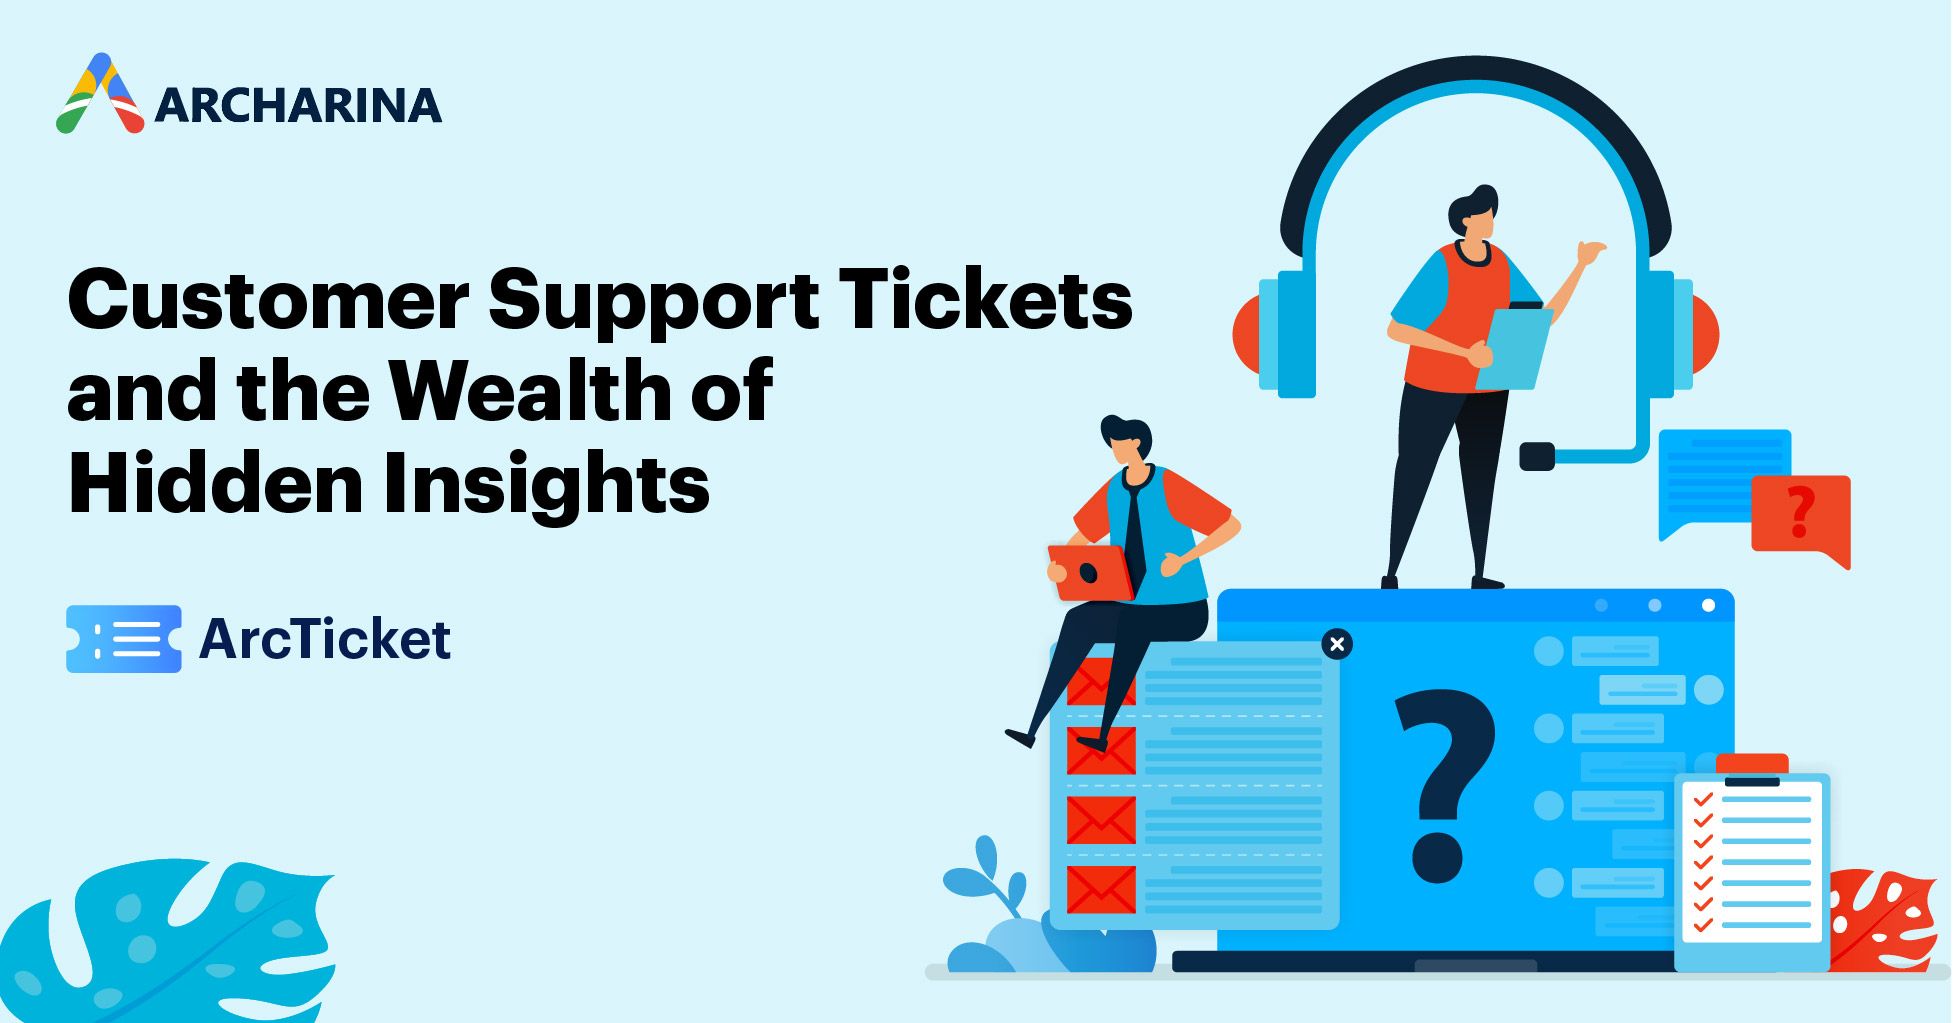 Customer Support Tickets and the Wealth of Hidden Insights